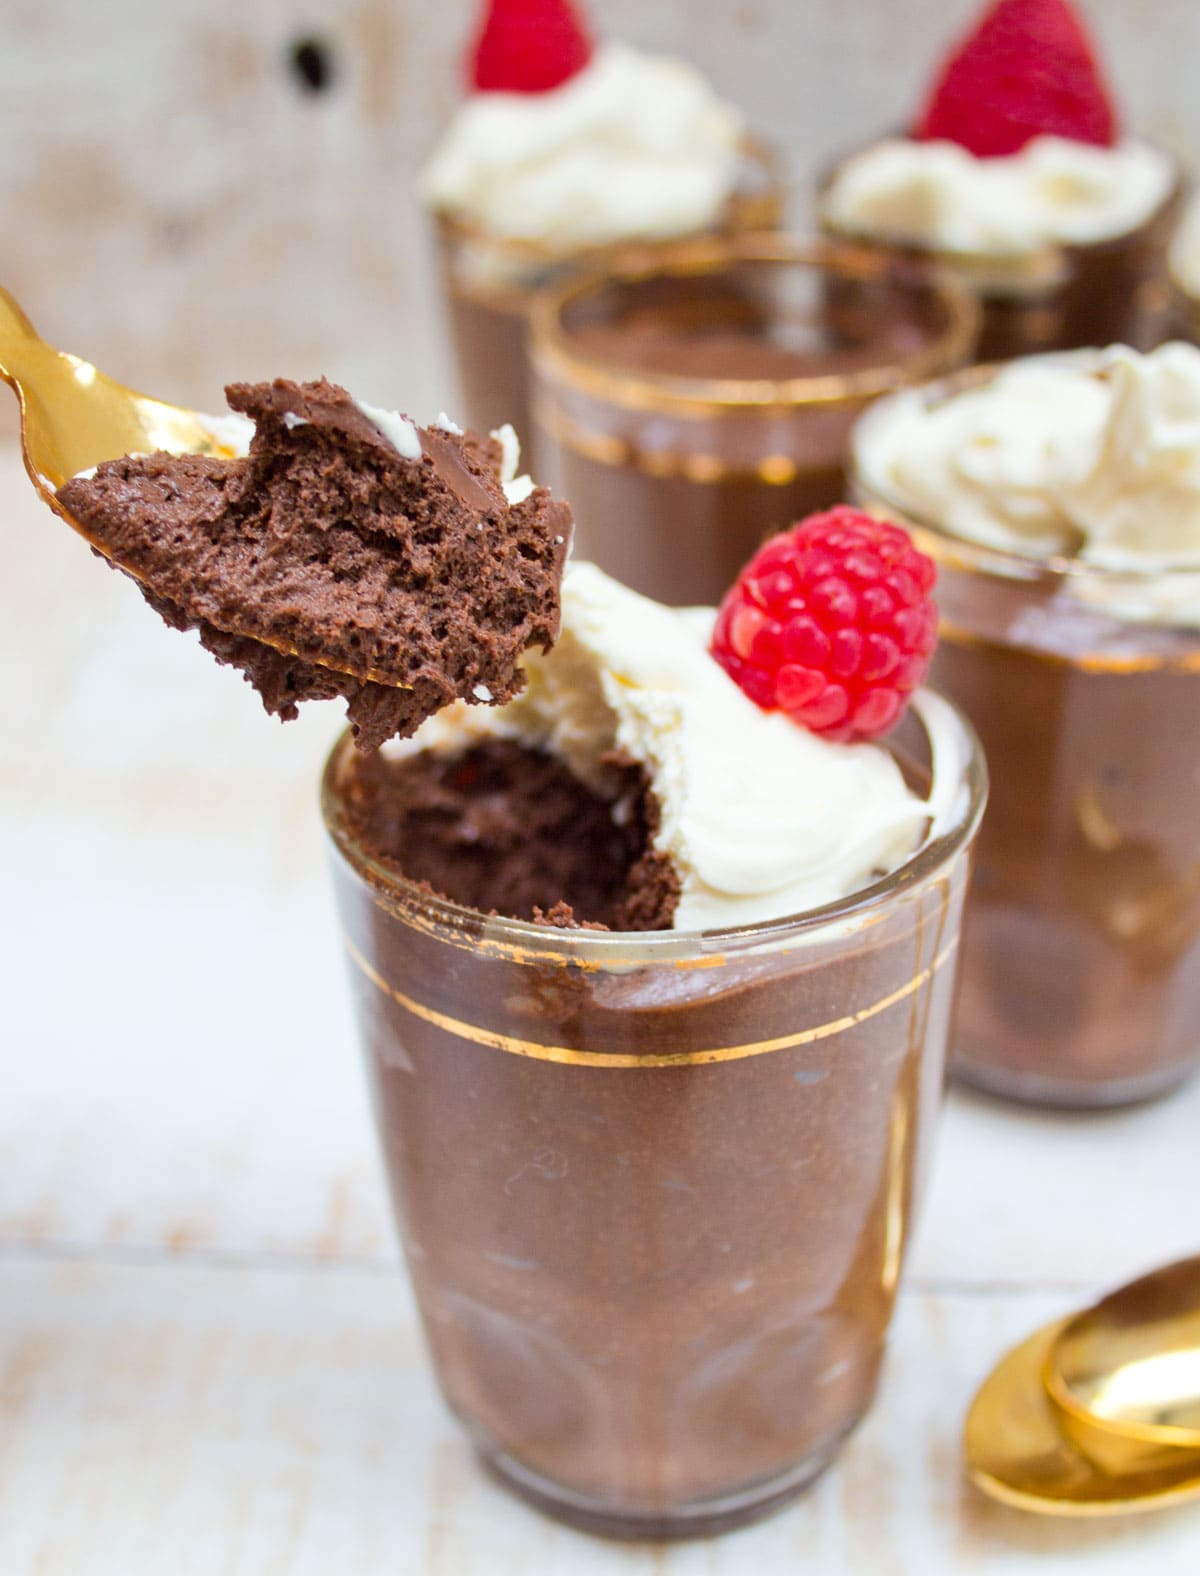 Taking a spoon of chocolate mousse out of a dessert cup.